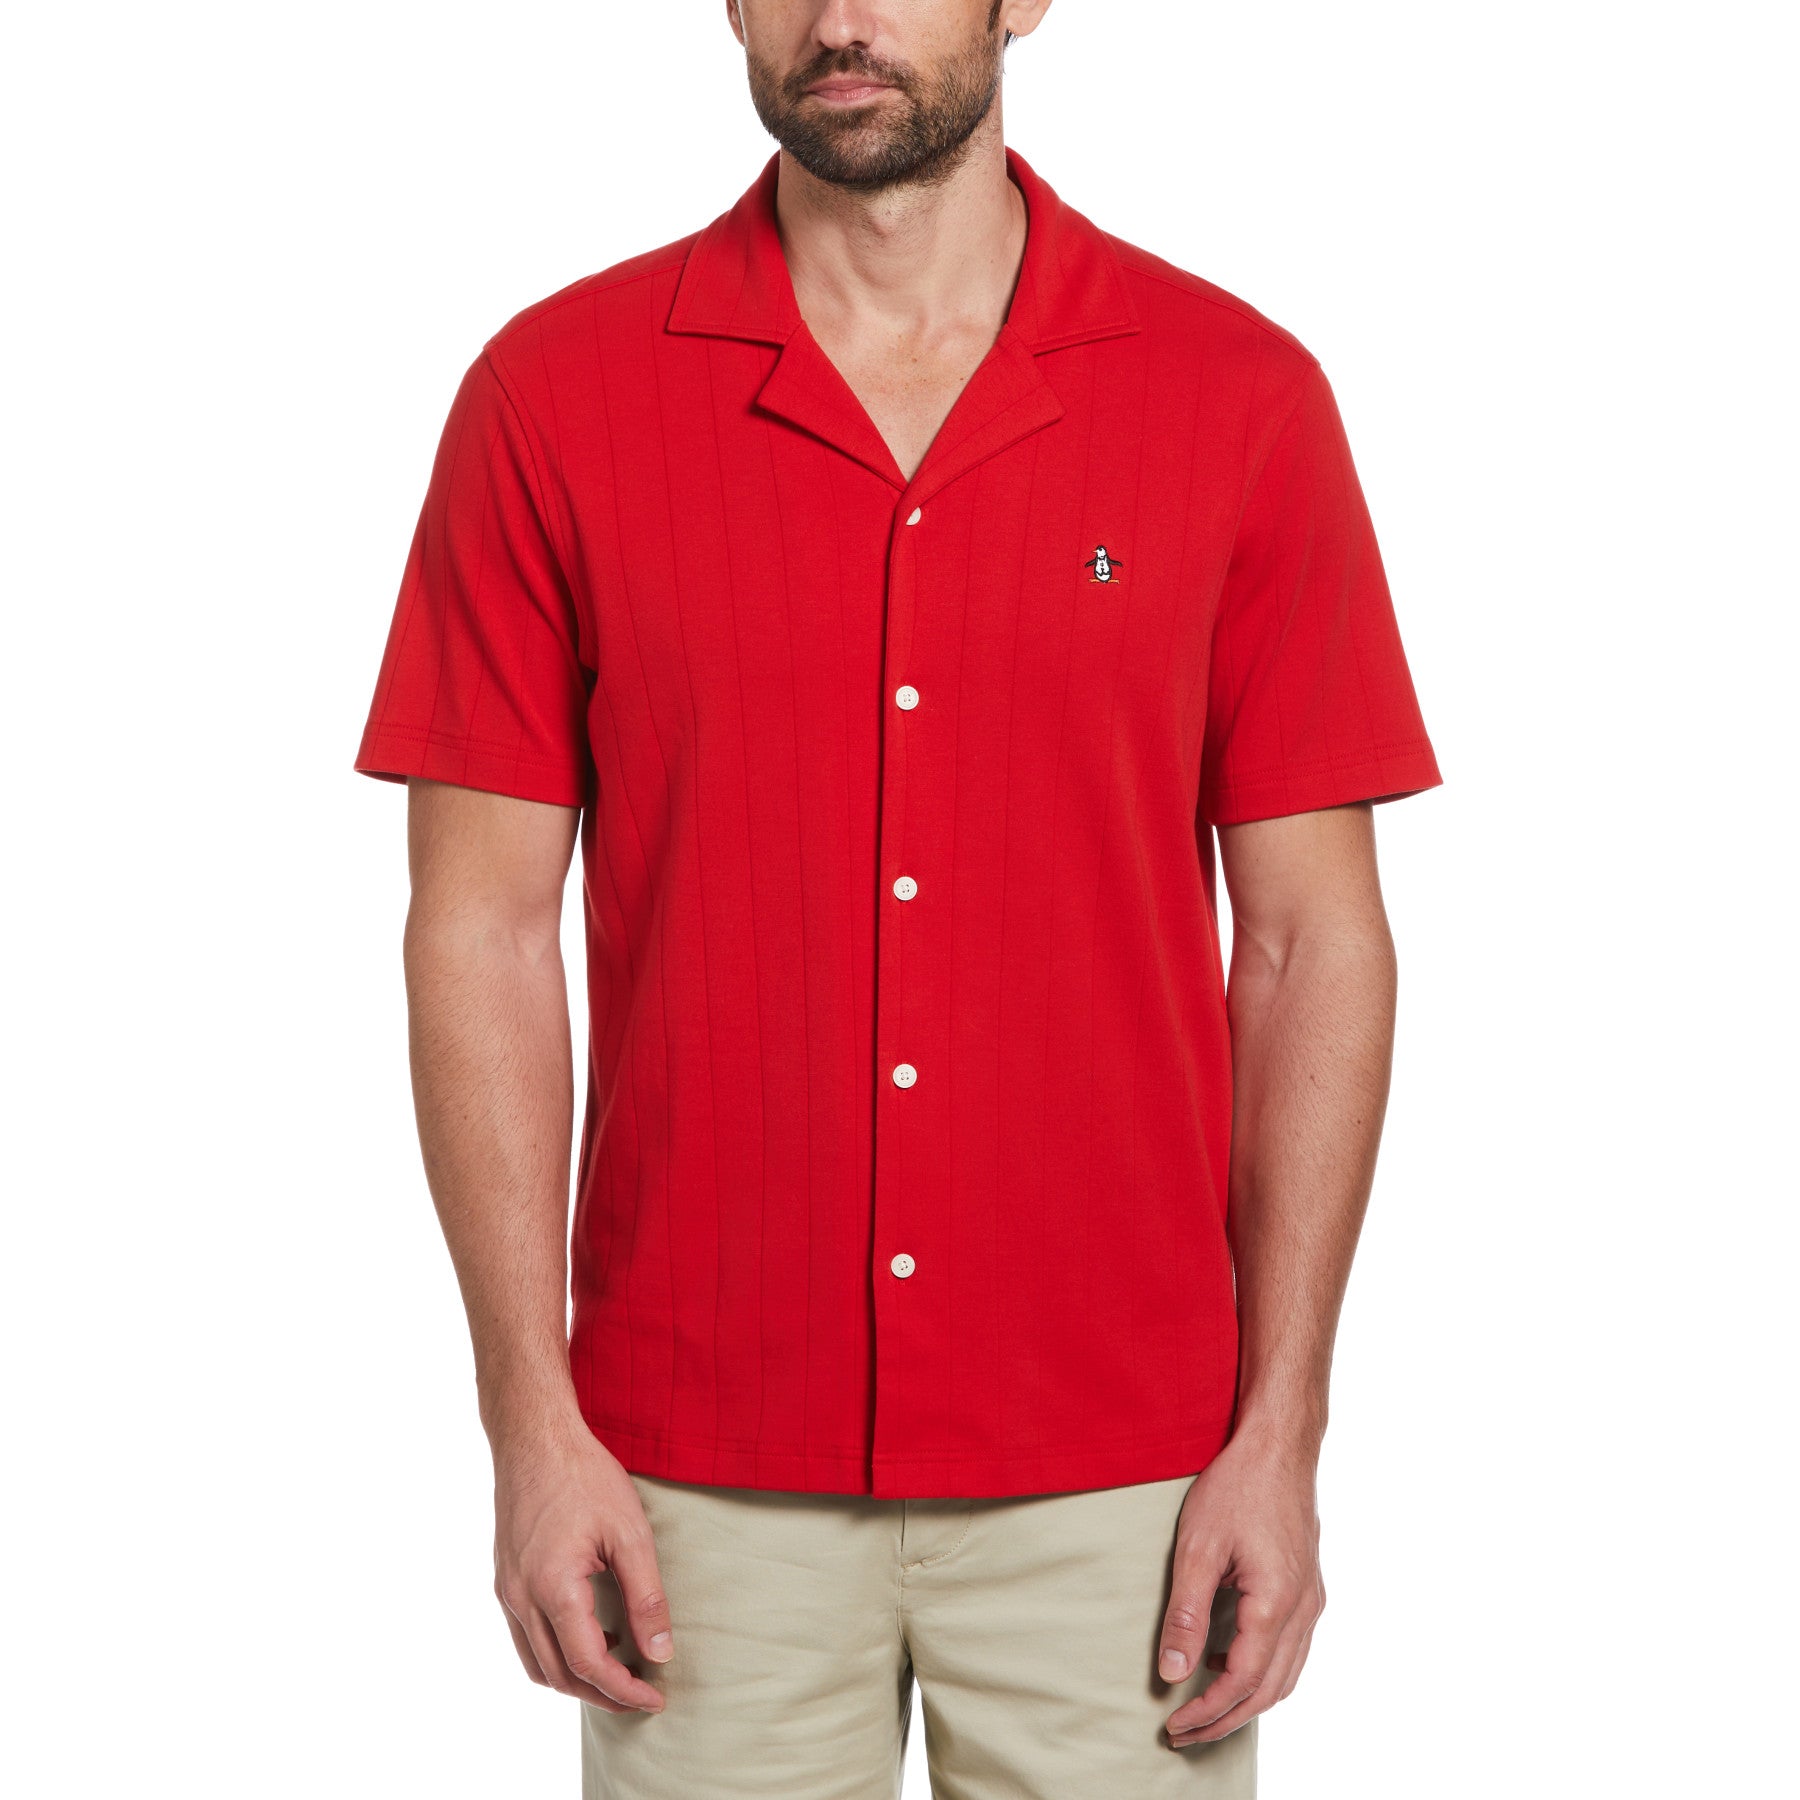 View Icons Organic Cotton Striped Short Sleeve Shirt With Camp Collar In Sa information